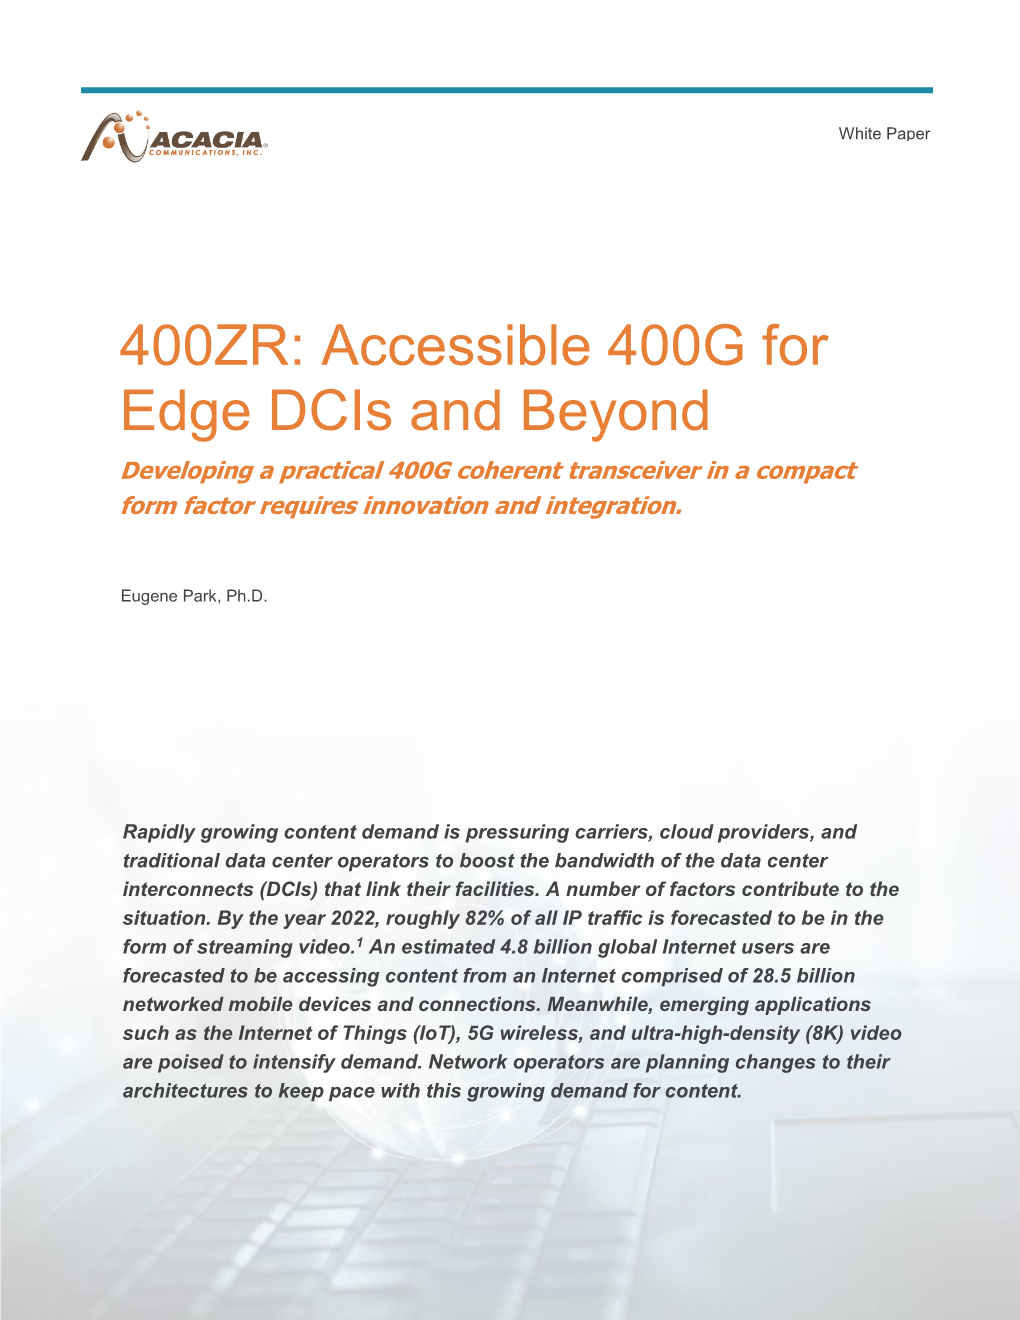 400ZR: Accessible 400G for Edge Dcis and Beyond Developing a Practical 400G Coherent Transceiver in a Compact Form Factor Requires Innovation and Integration